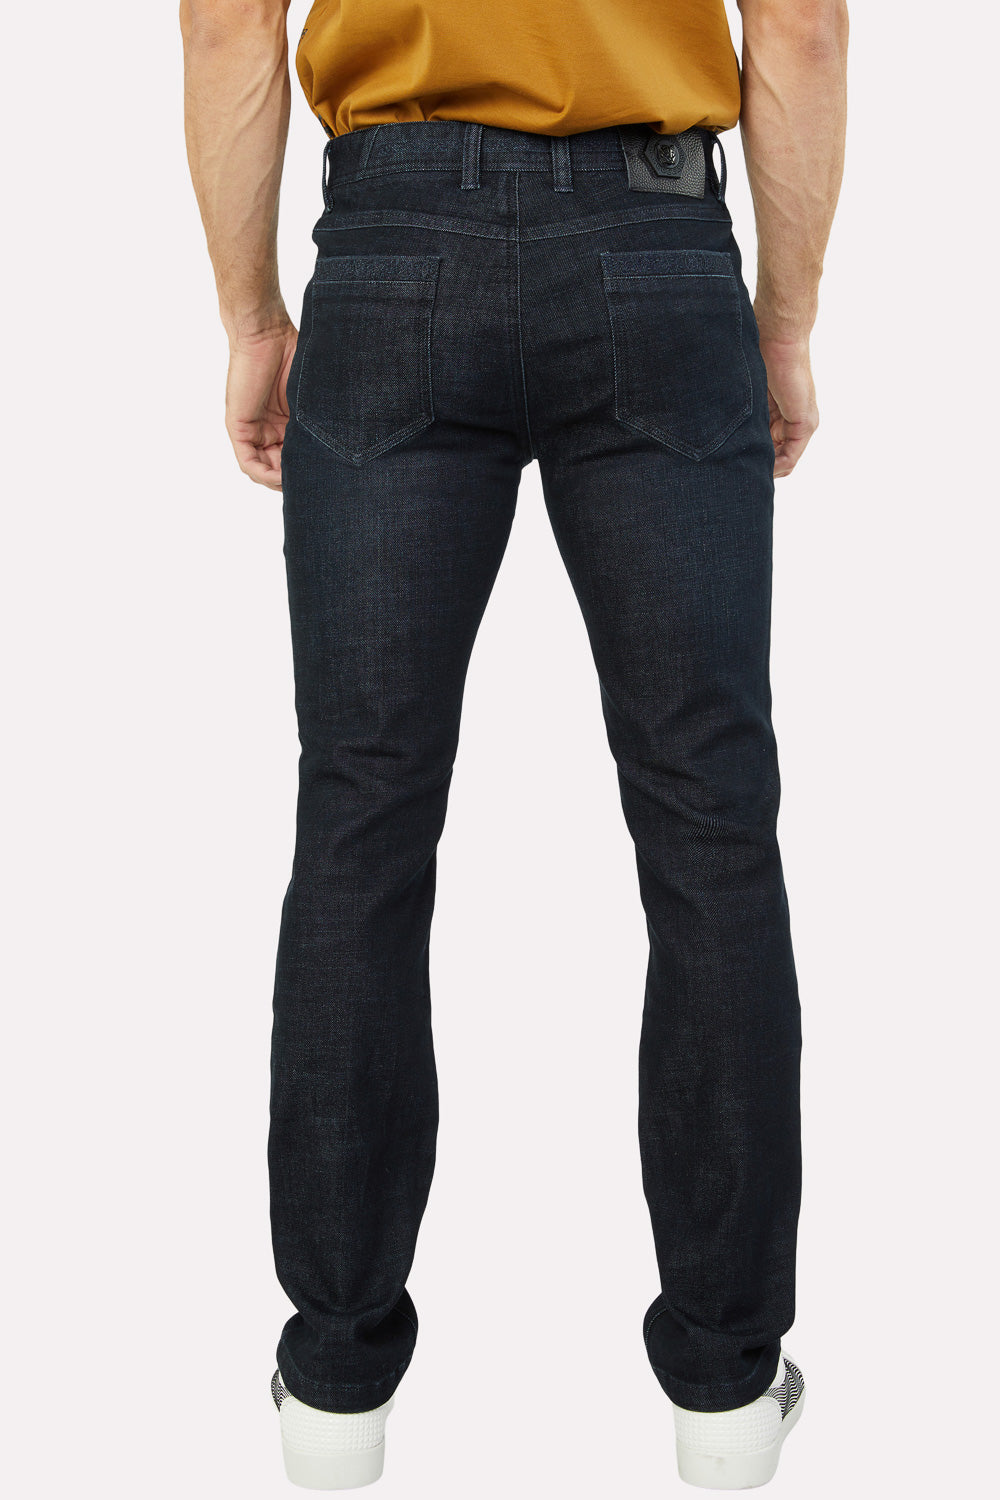  Men's | Elastic Waist Denim Jean in Stretch Fabric | Comfortable and  Stylish Pants 